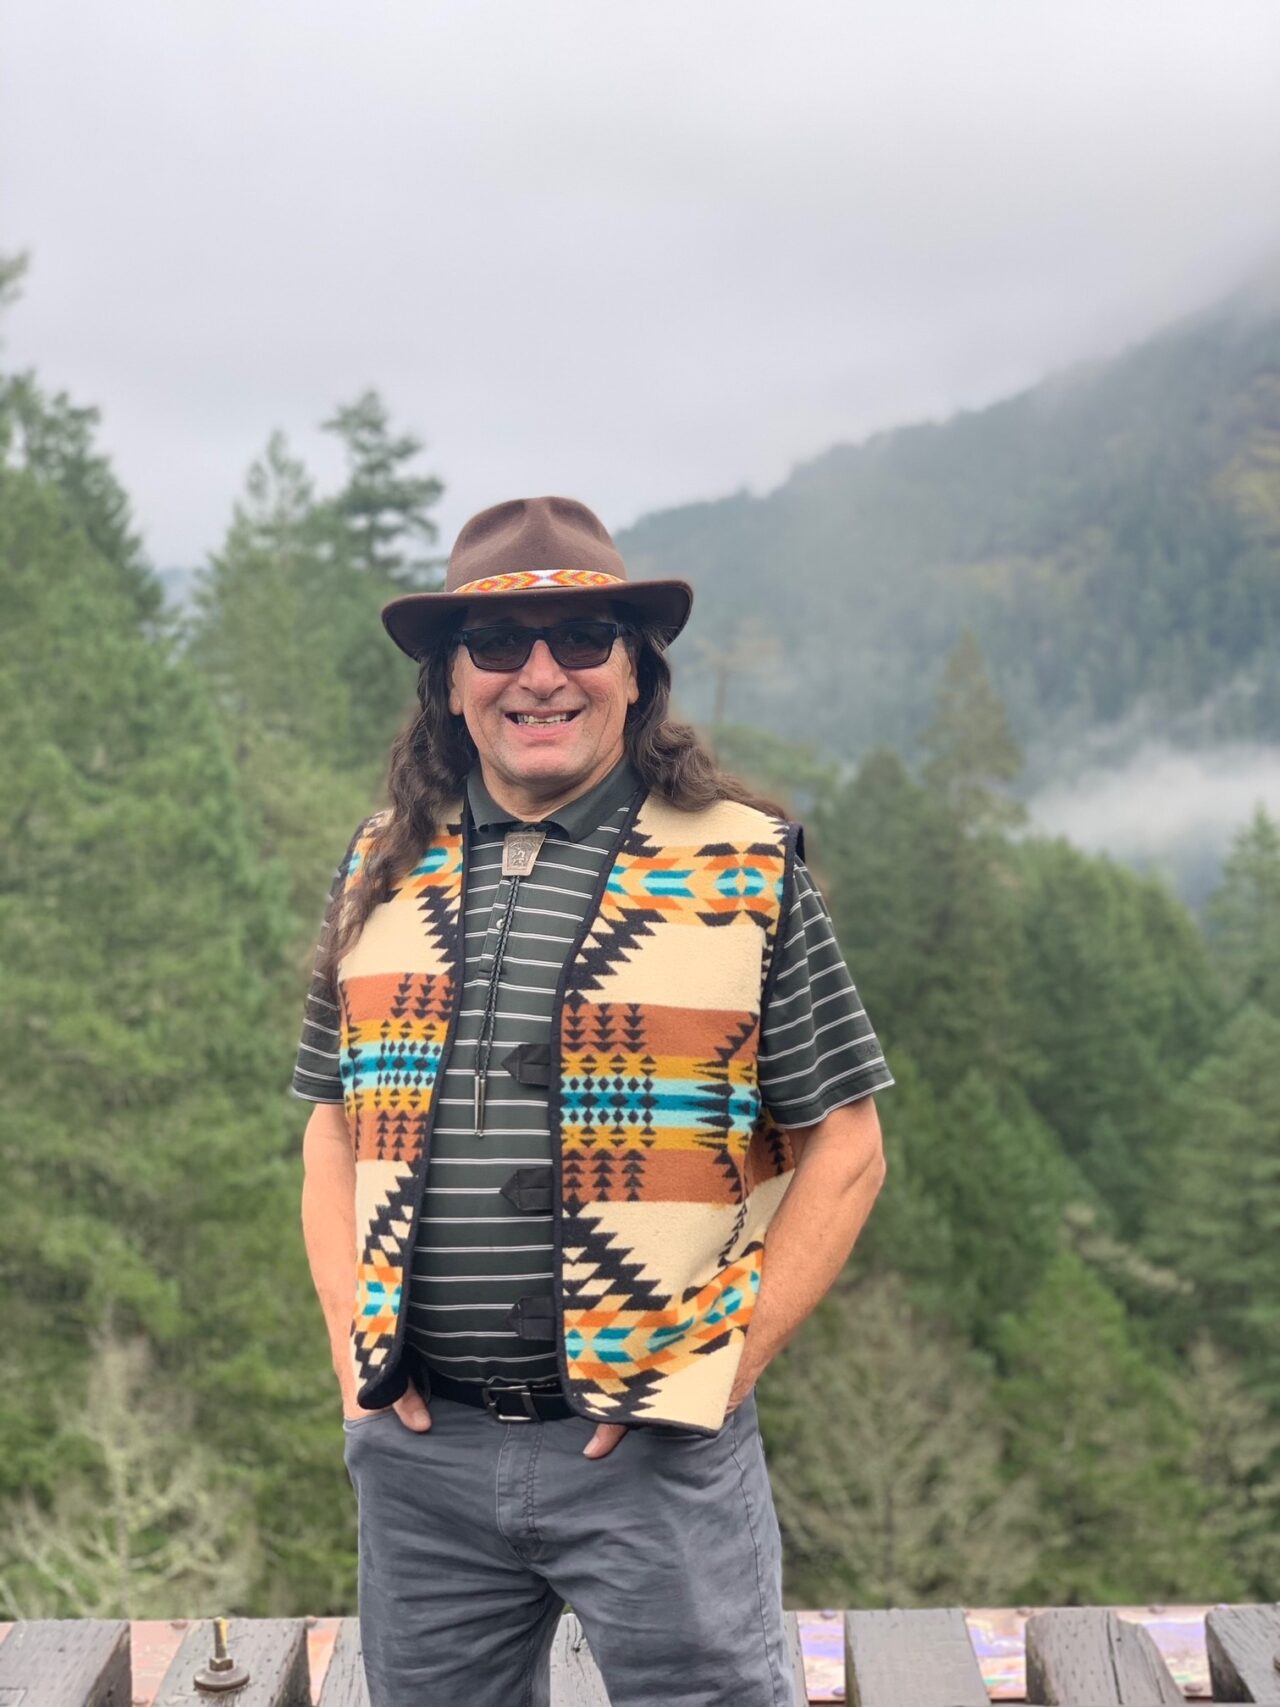 Jeffrey Thomas directs the Timber, Fish and Wildlife Program of the Puyallup Tribal Fisheries Department, and is a longtime, passionate advocate for tribal rights and culture.